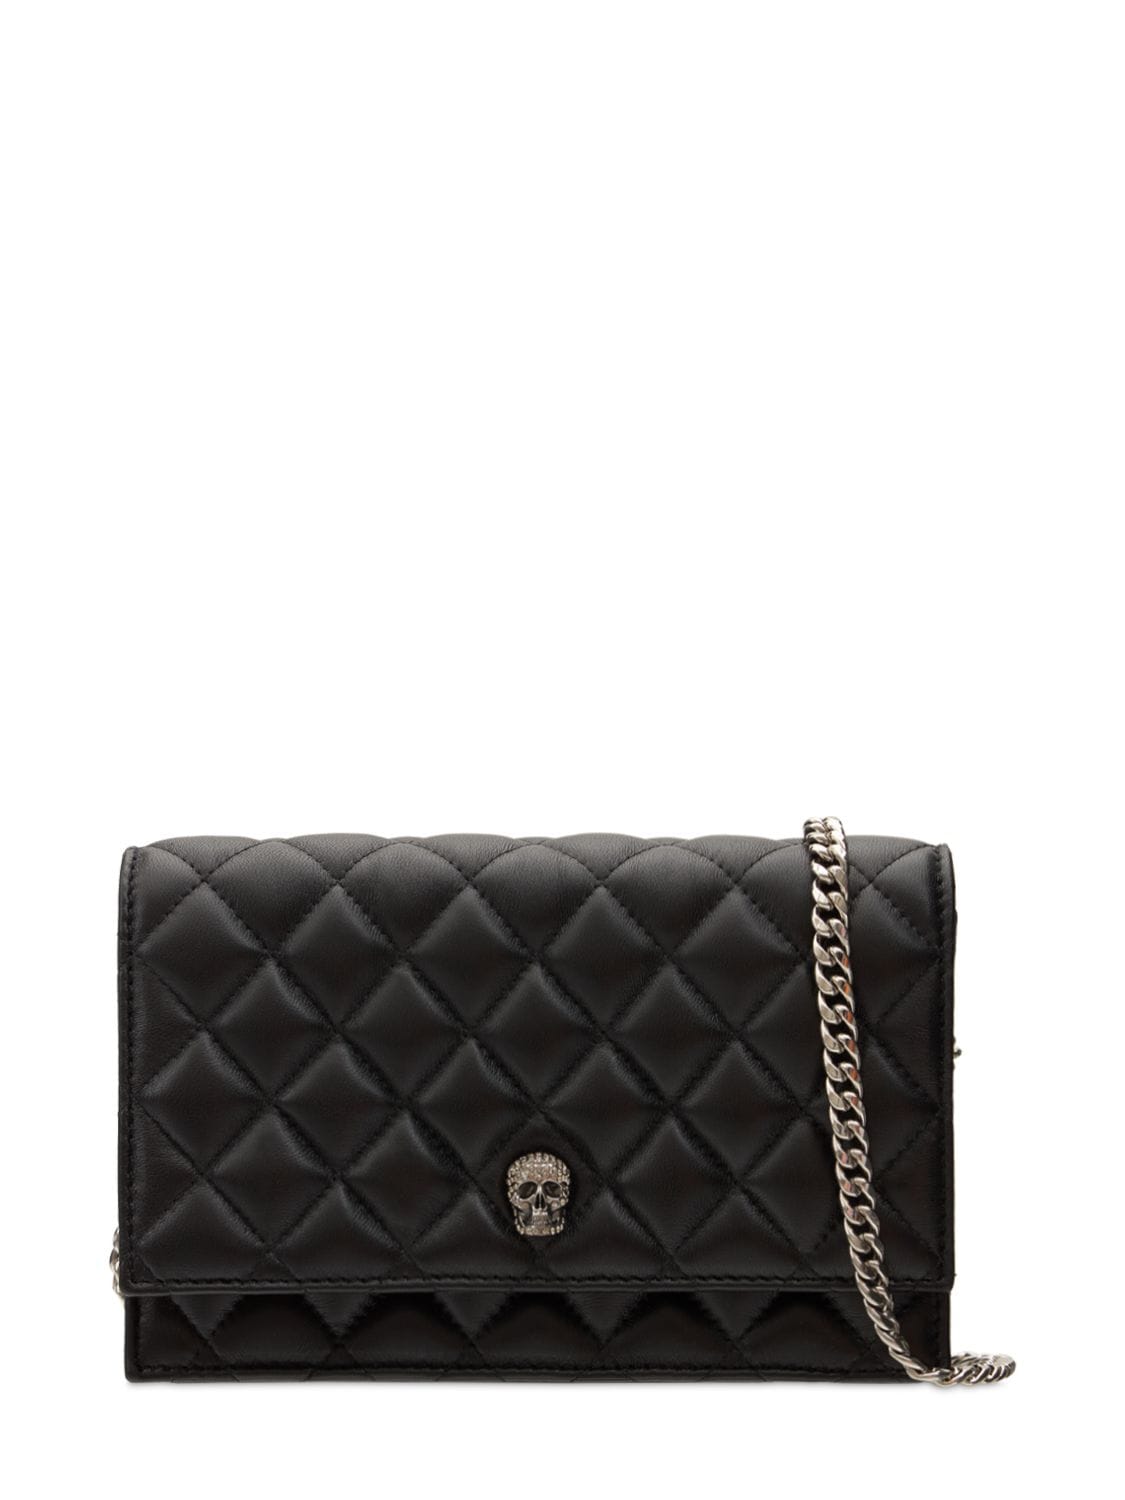 Small Quilted Pave Skull Shoulder Bag